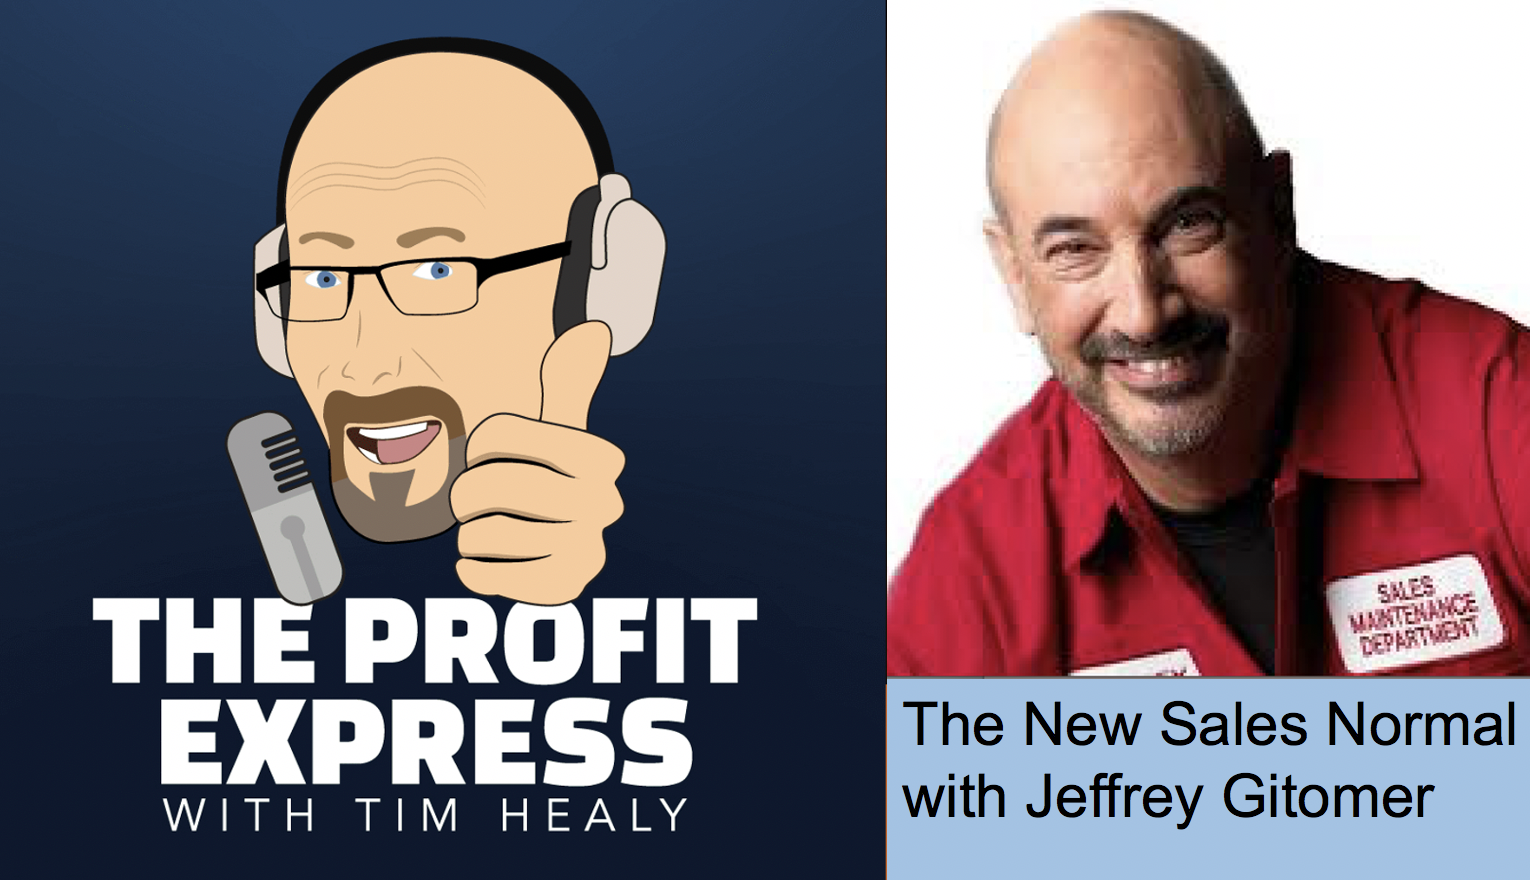 The New Sales Normal: Jeffrey Gitomer